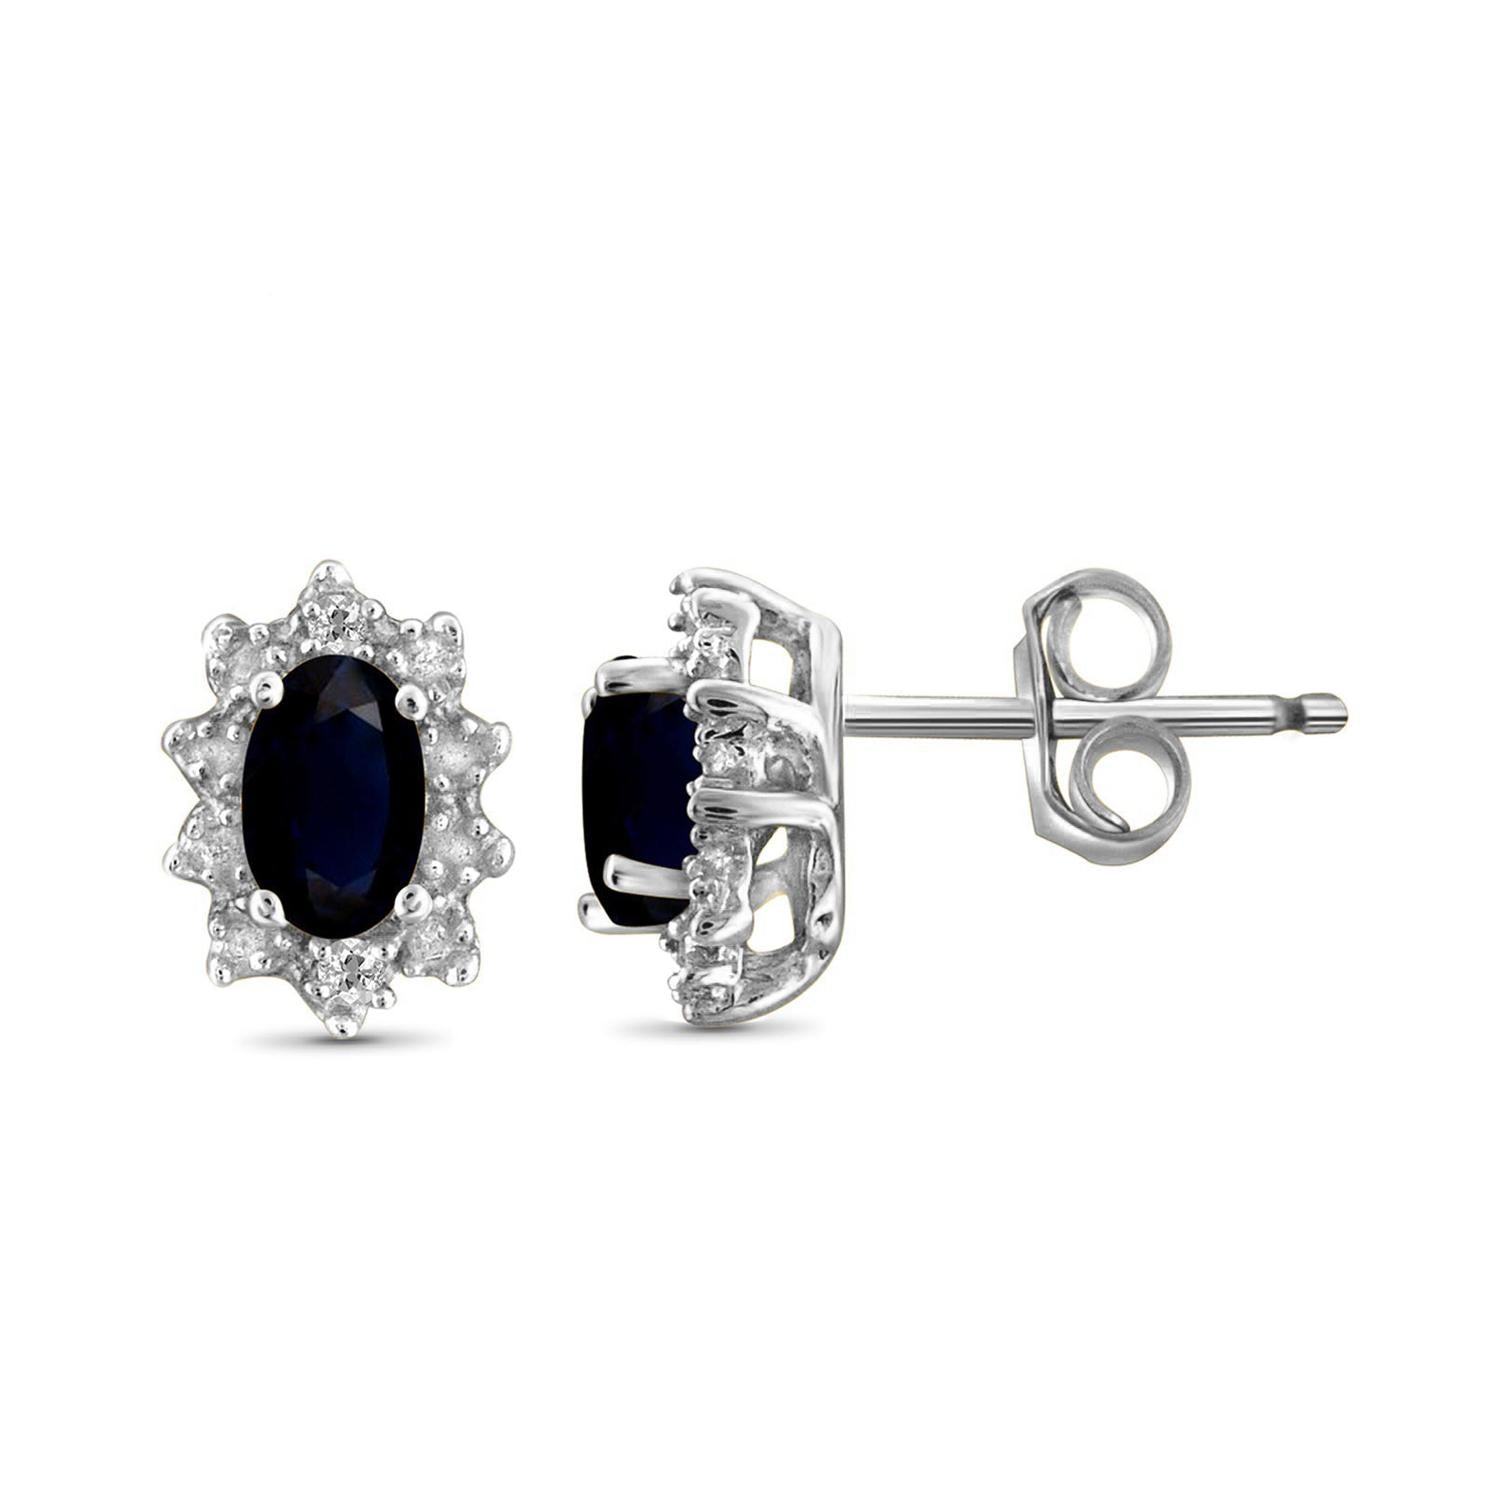 0.60 Carat Sapphire & Accent White Diamond Earrings in Sterling Silver Or 14K Gold-Plated